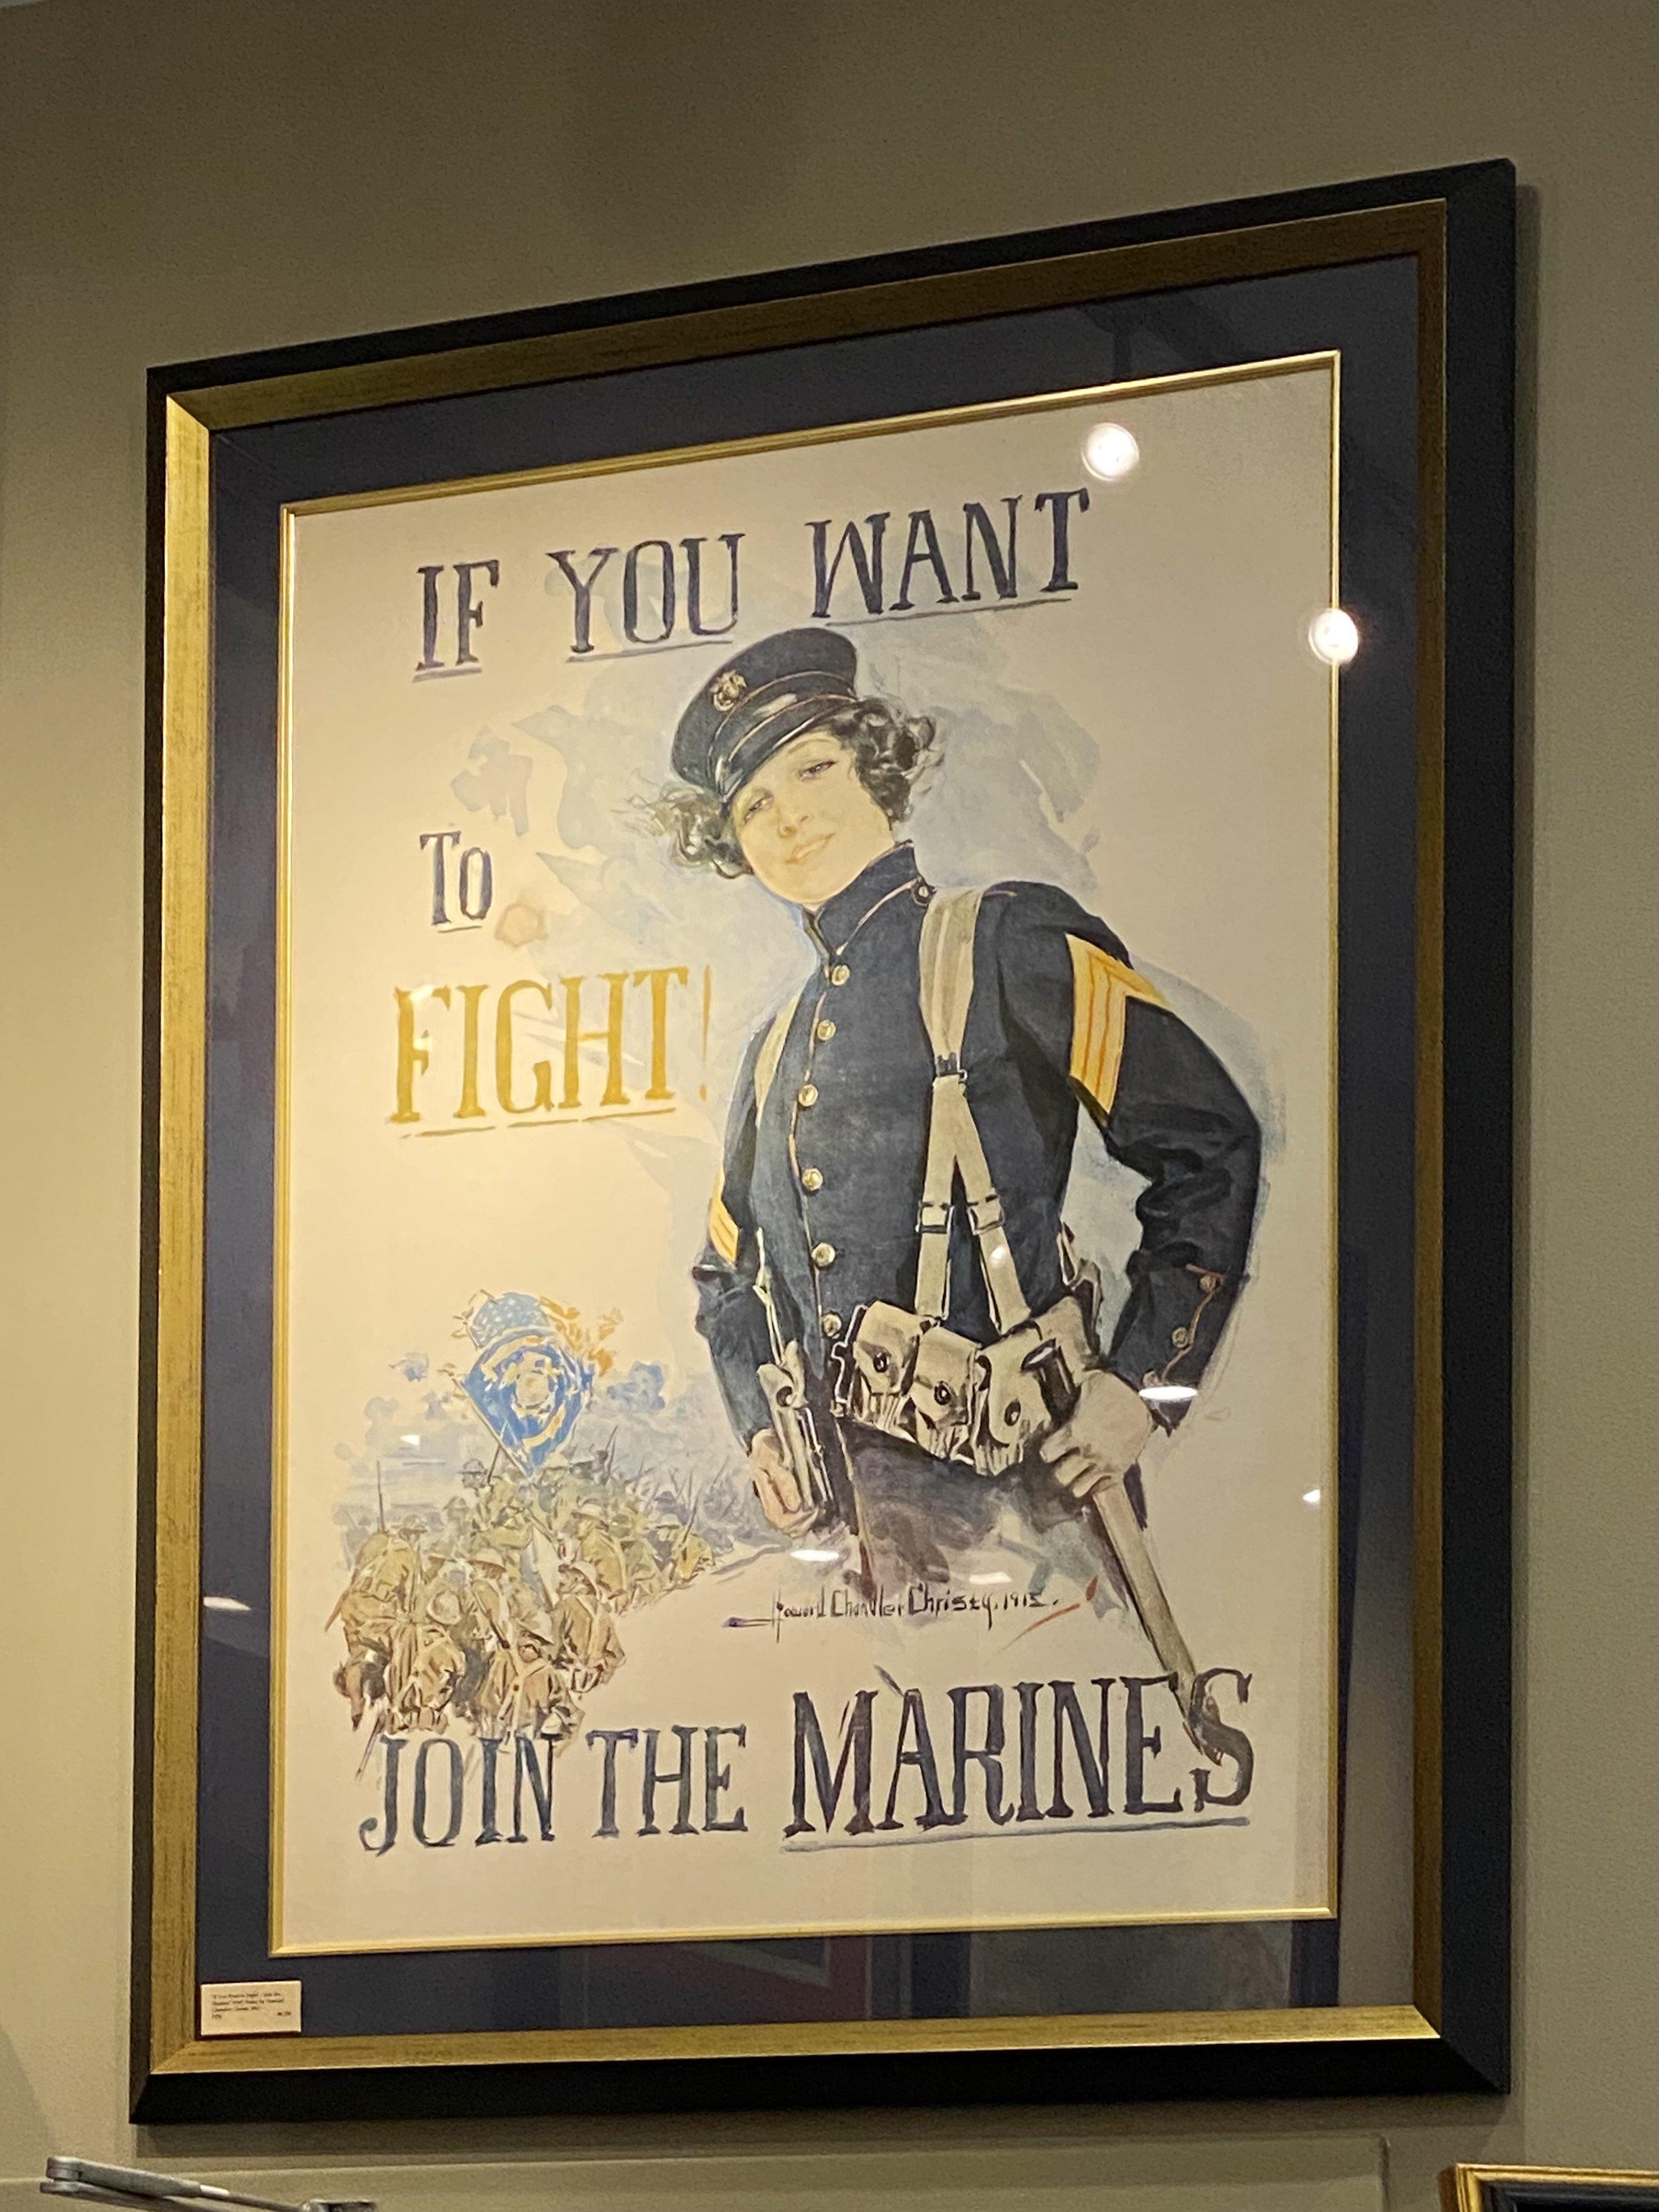 tell that to the marines poster meaning